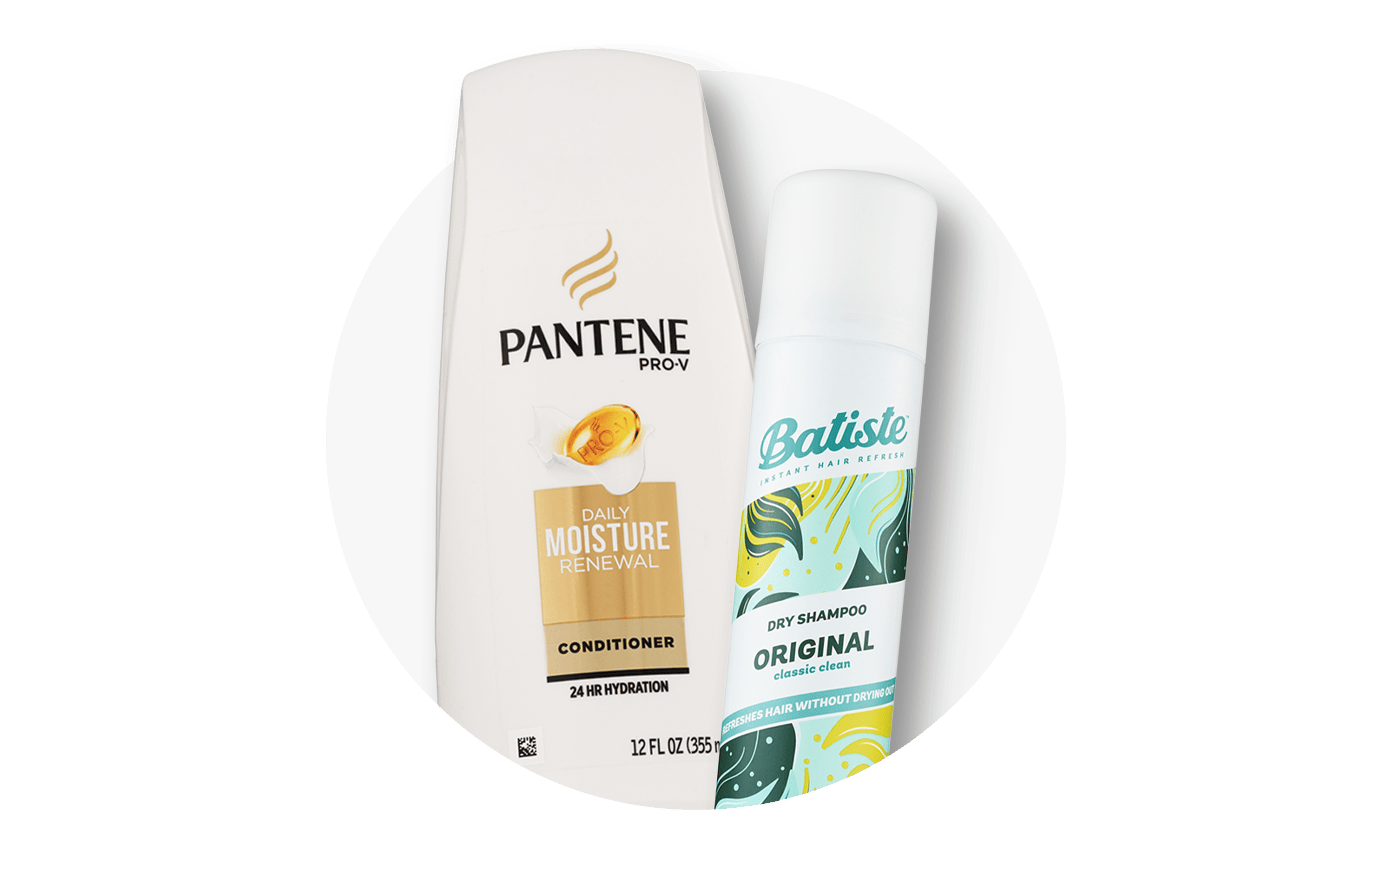 Shampoo and conditioner, showing Pantene and Batiste products